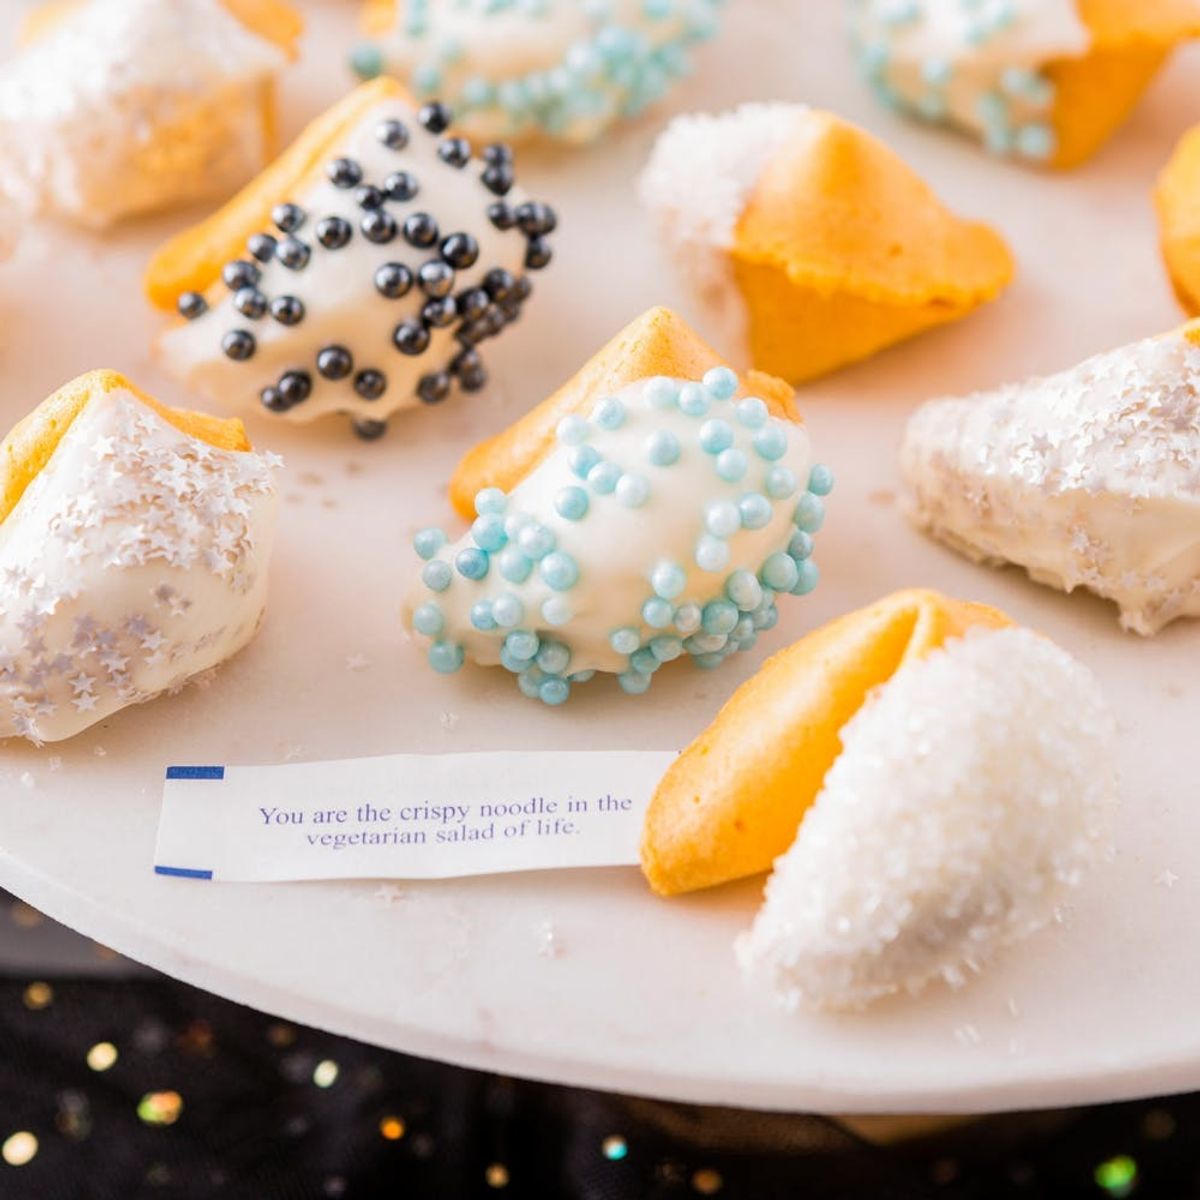 Glam Up Your New Year’s Party With This Glittery Fortune Cookies Recipe